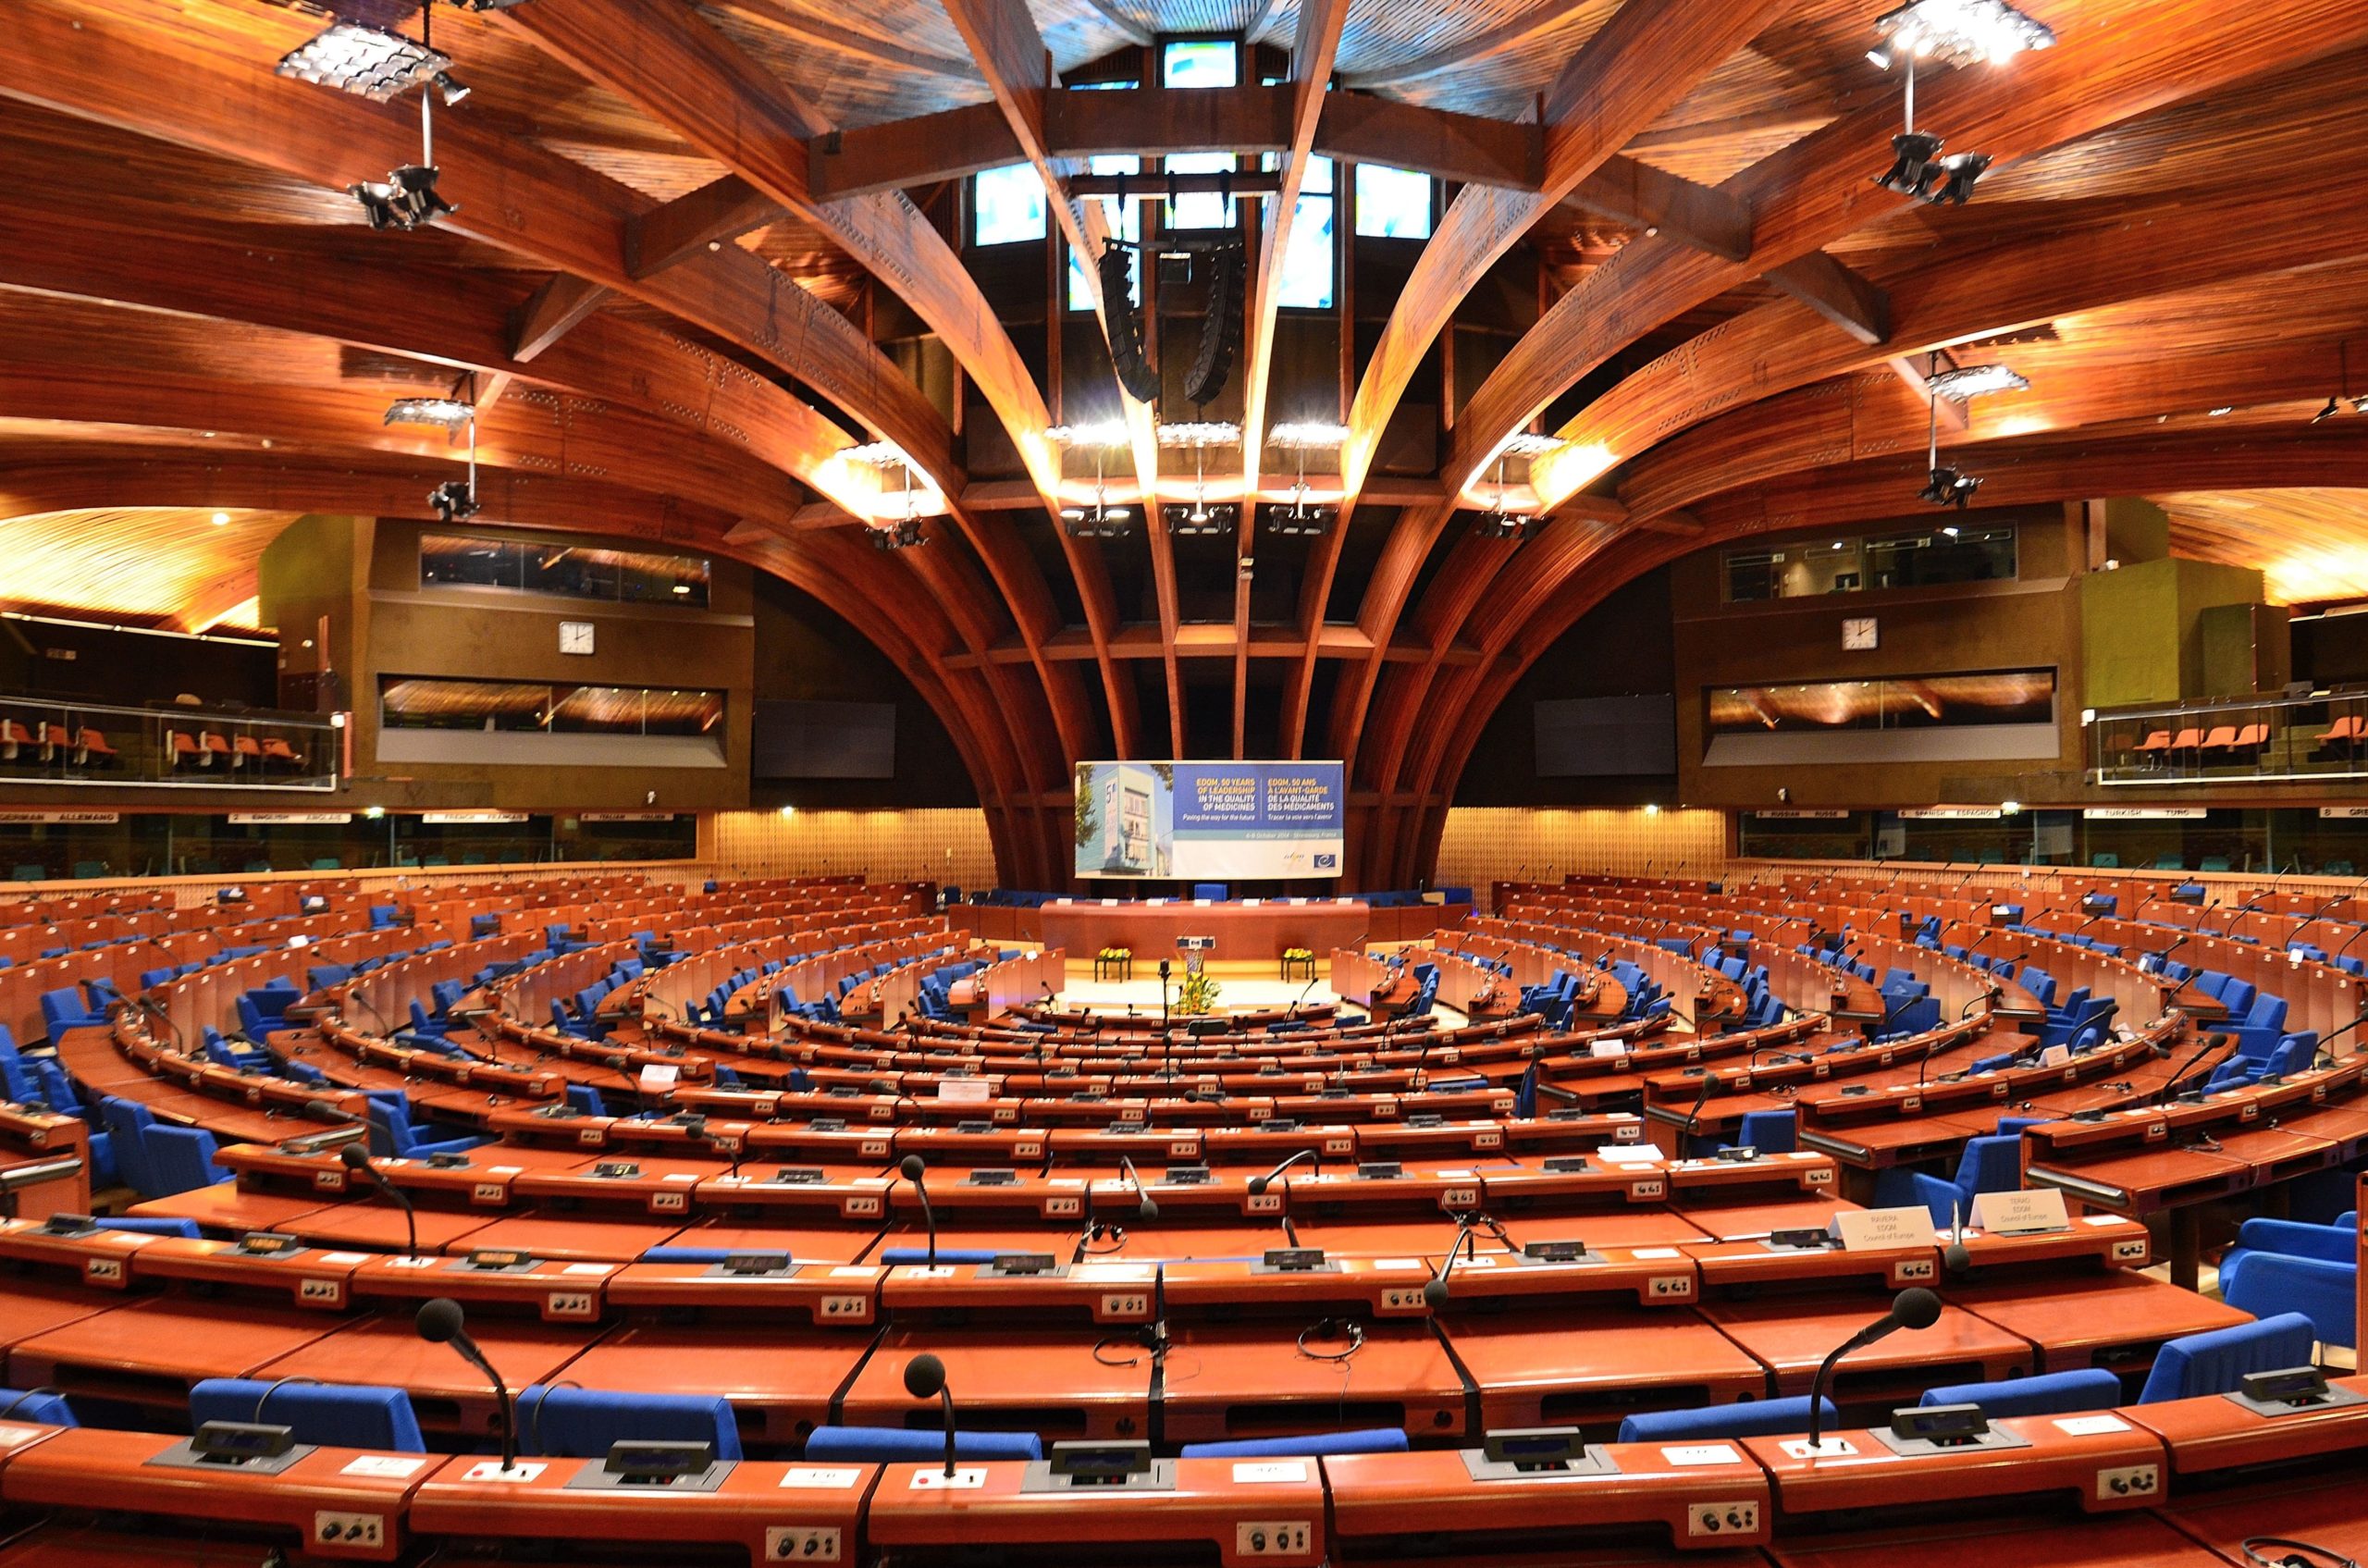 Council of Europe. Source: Creative Commons